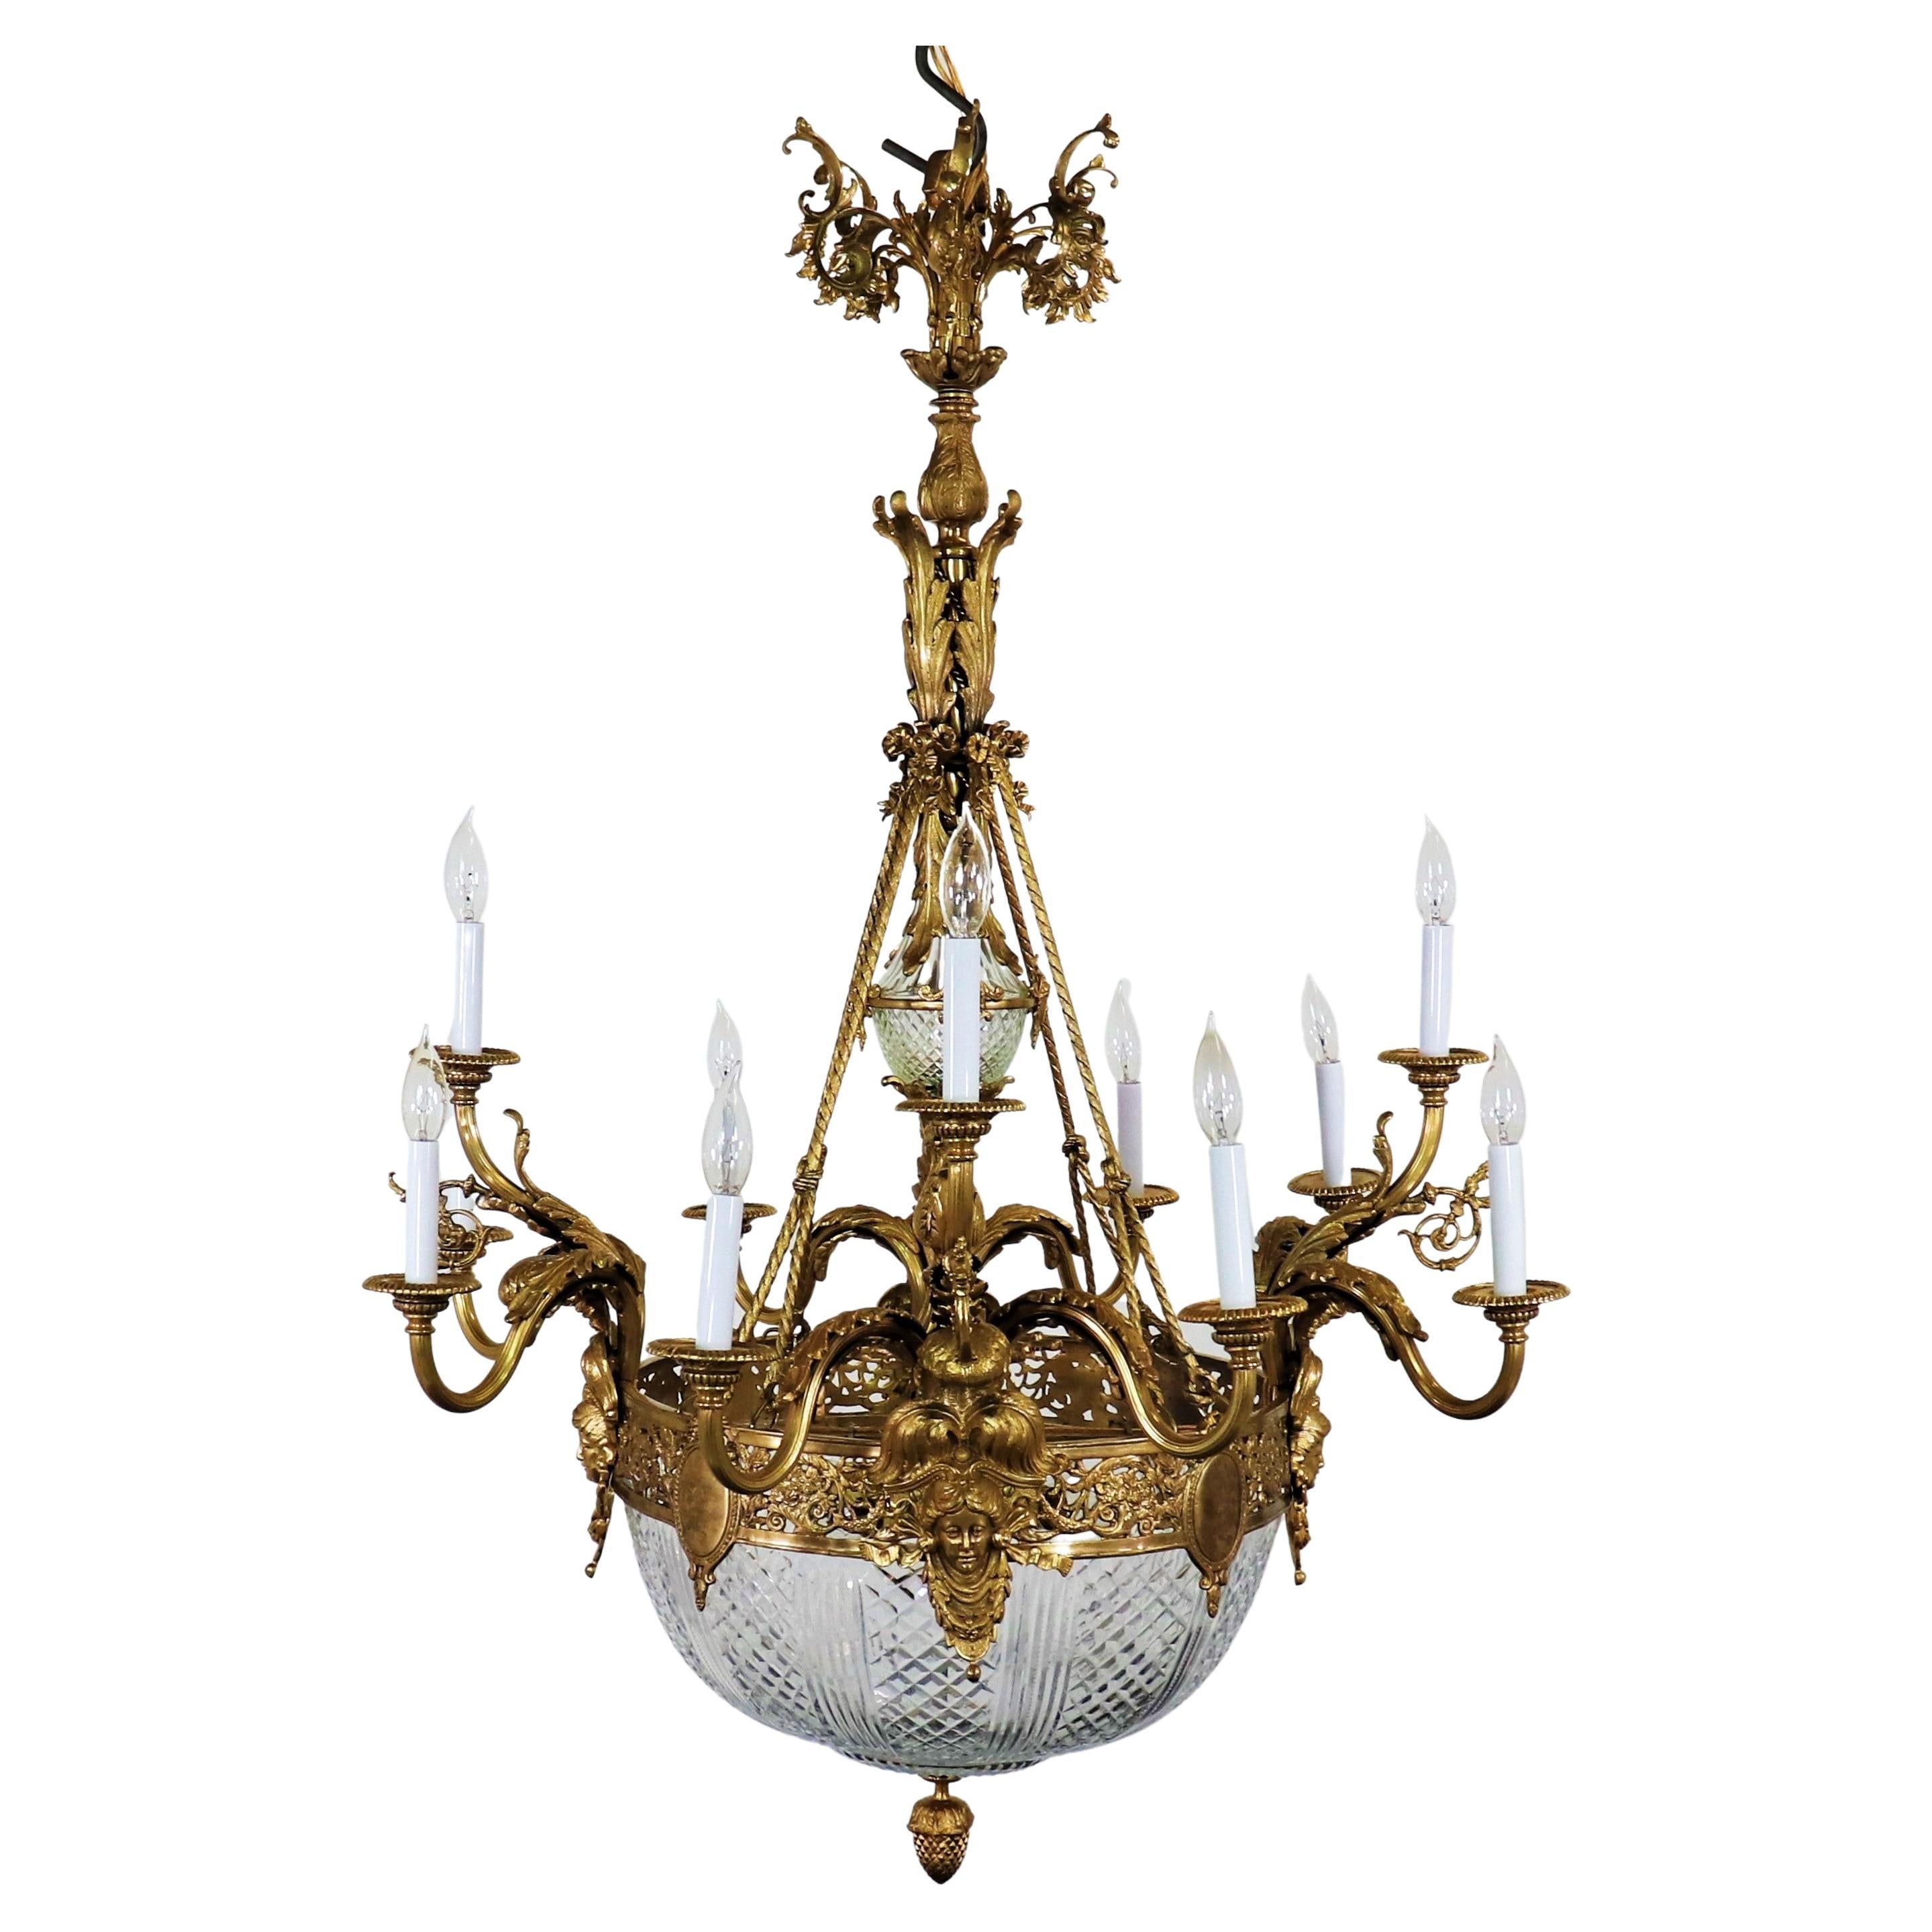 Circa 1910 French Beaux-Arts Gilt Bronze Chandelier For Sale